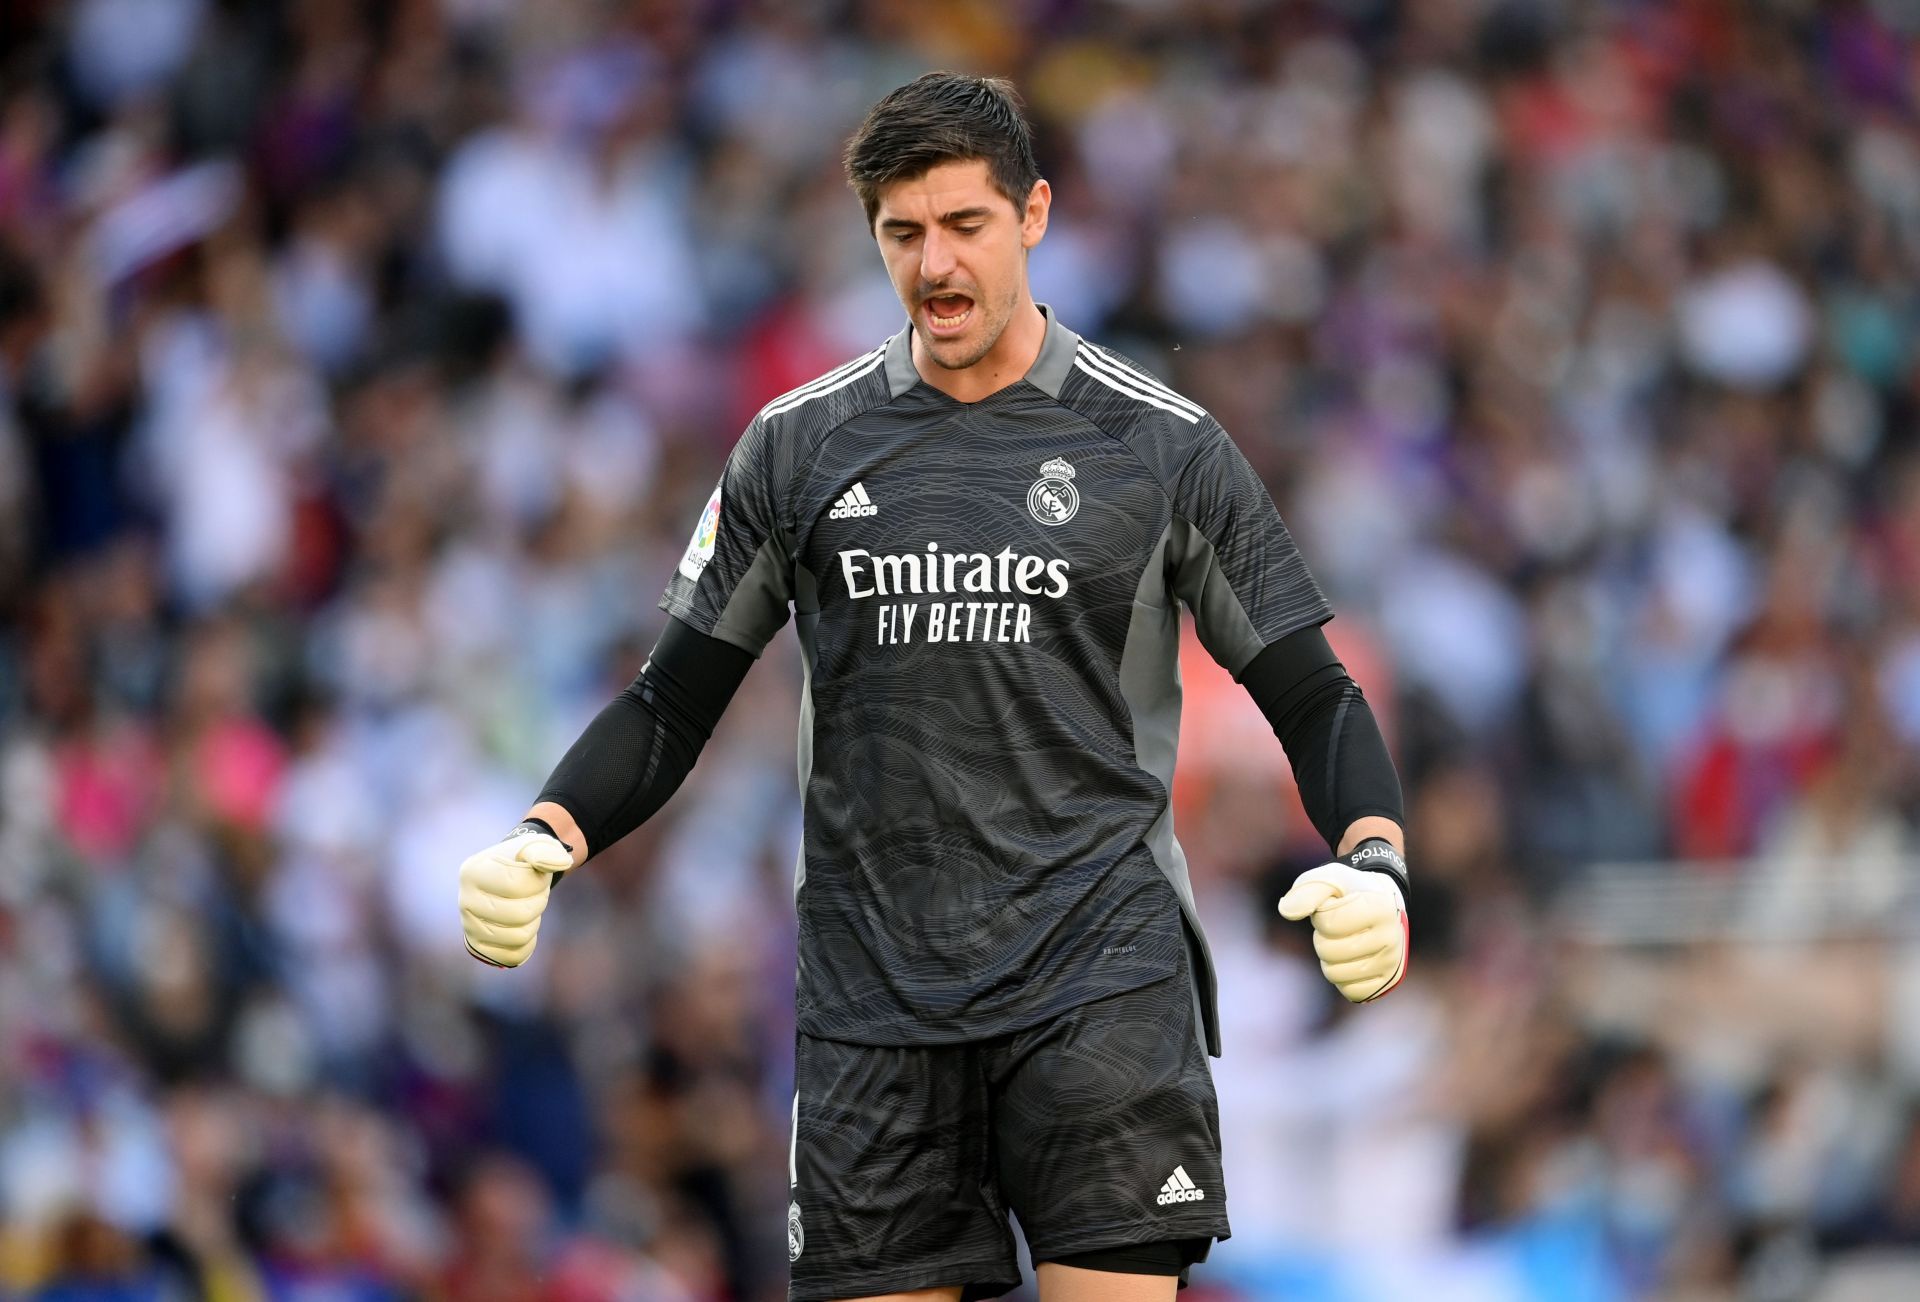 Thibaut Courtois is having another fine season at the Bernabeu.